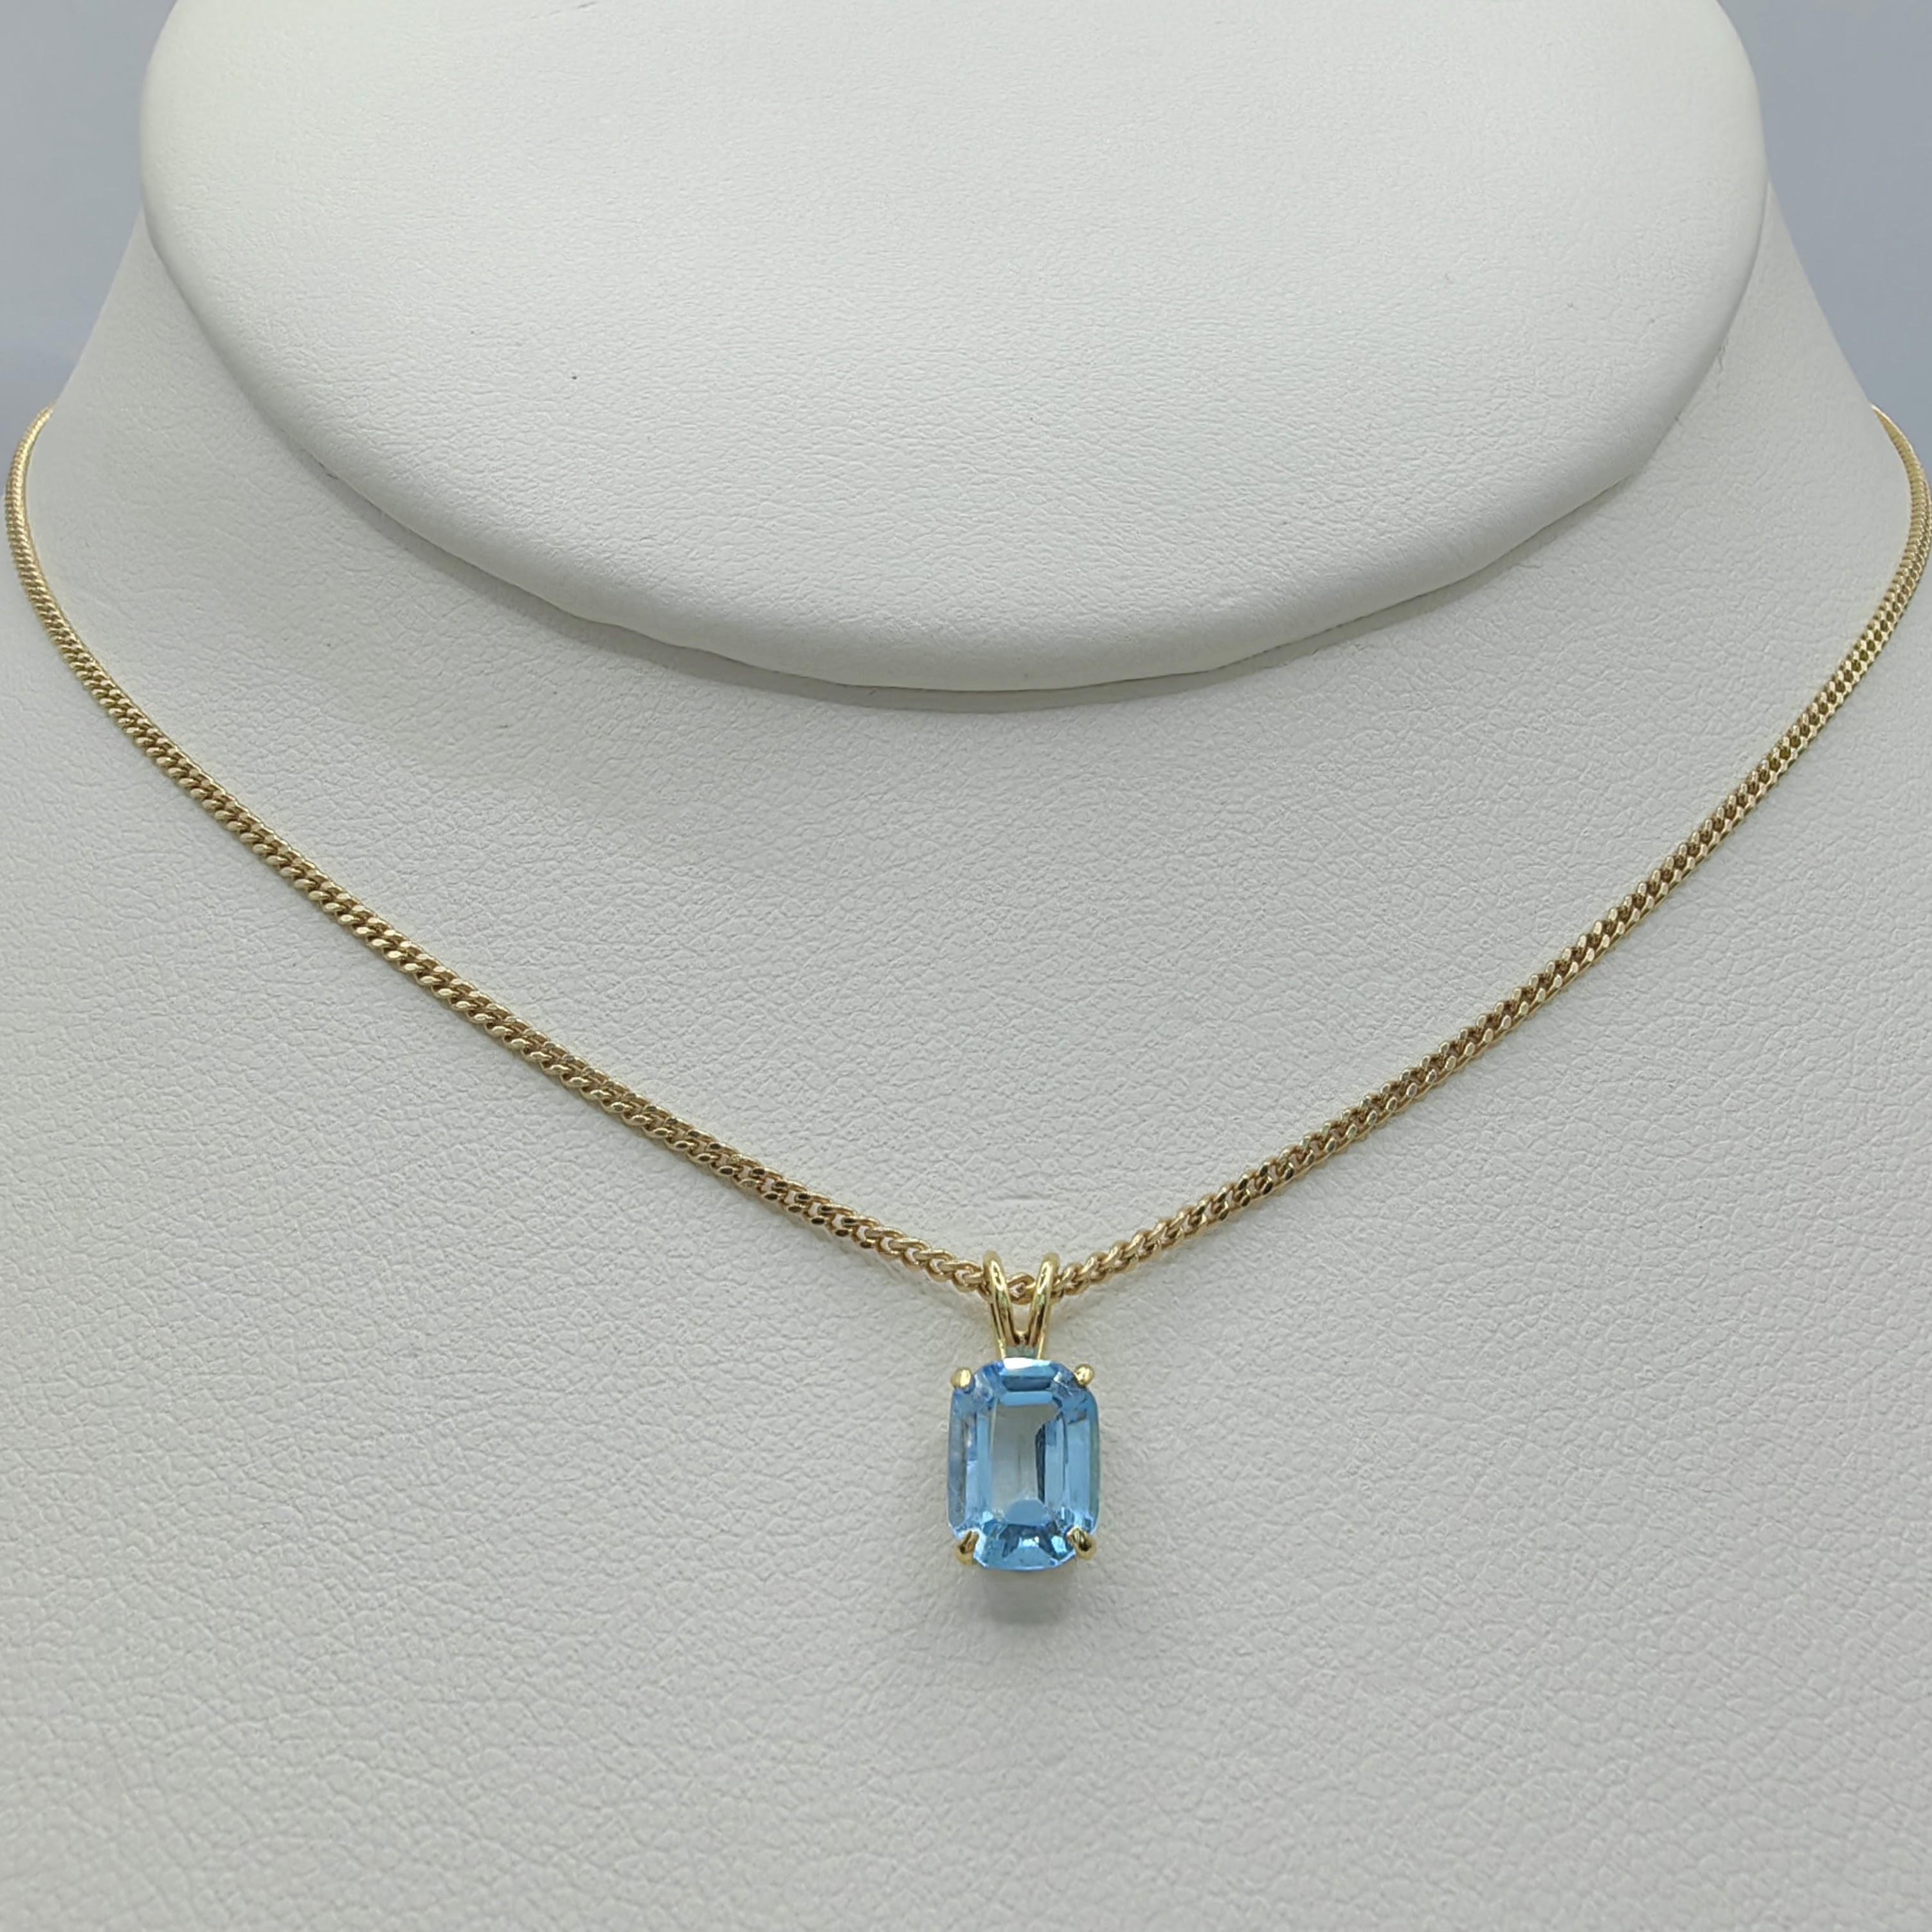 Introducing our Vintage 1980's Emerald Cut Blue Topaz Necklace Pendant in 14K Yellow Gold, a timeless piece that exudes elegance and sophistication. This exquisite pendant showcases an emerald cut blue topaz gemstone, measuring 7.95mm x 5.42mm, with